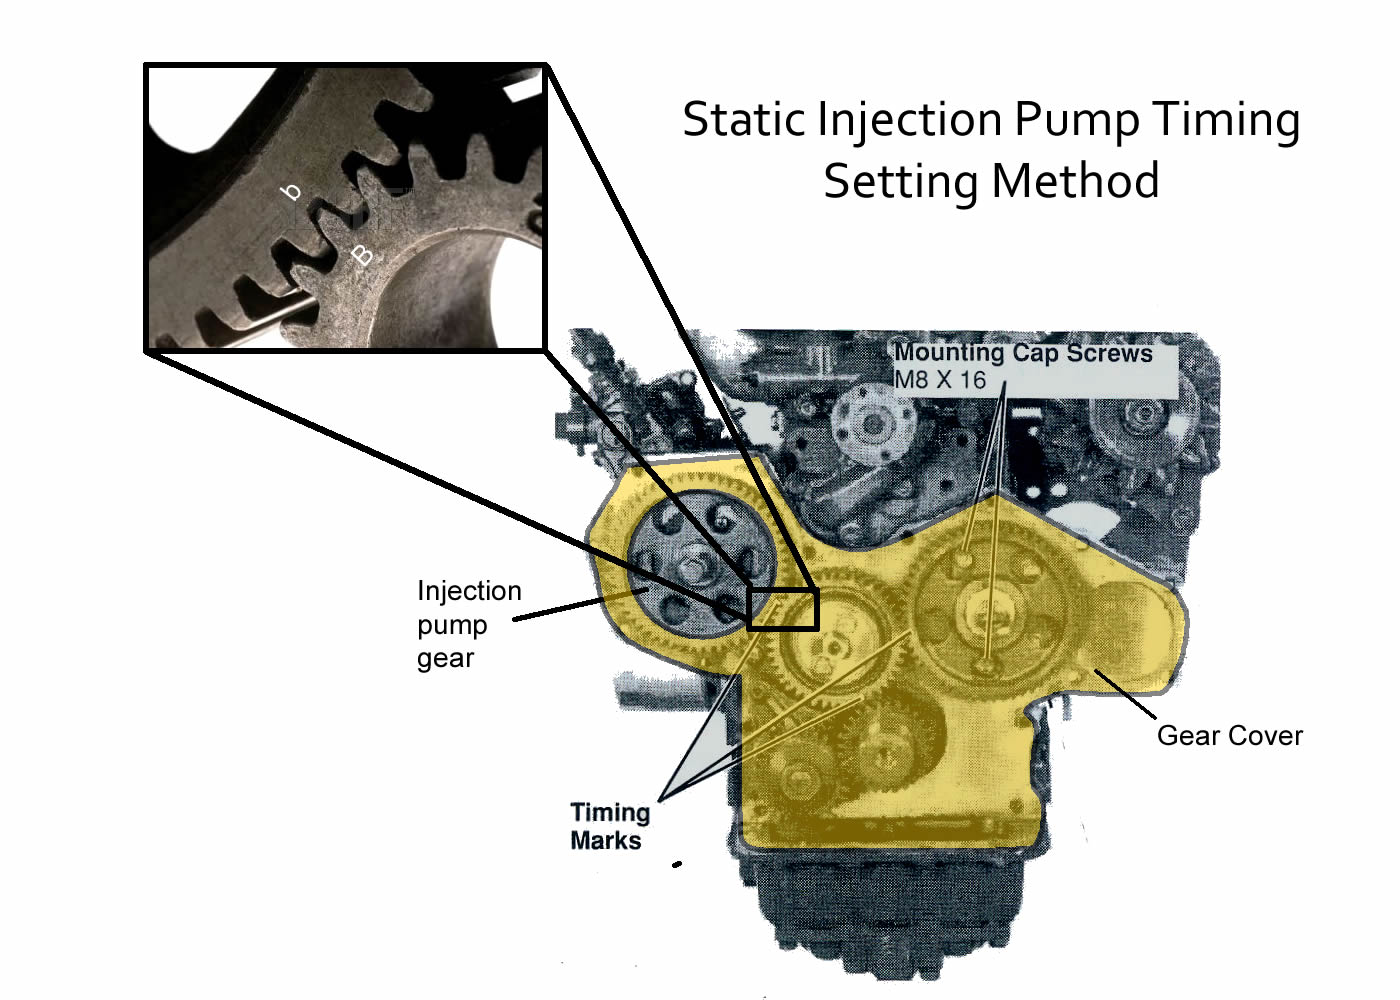 Oil & Fuel Setting Injection Pump Timing